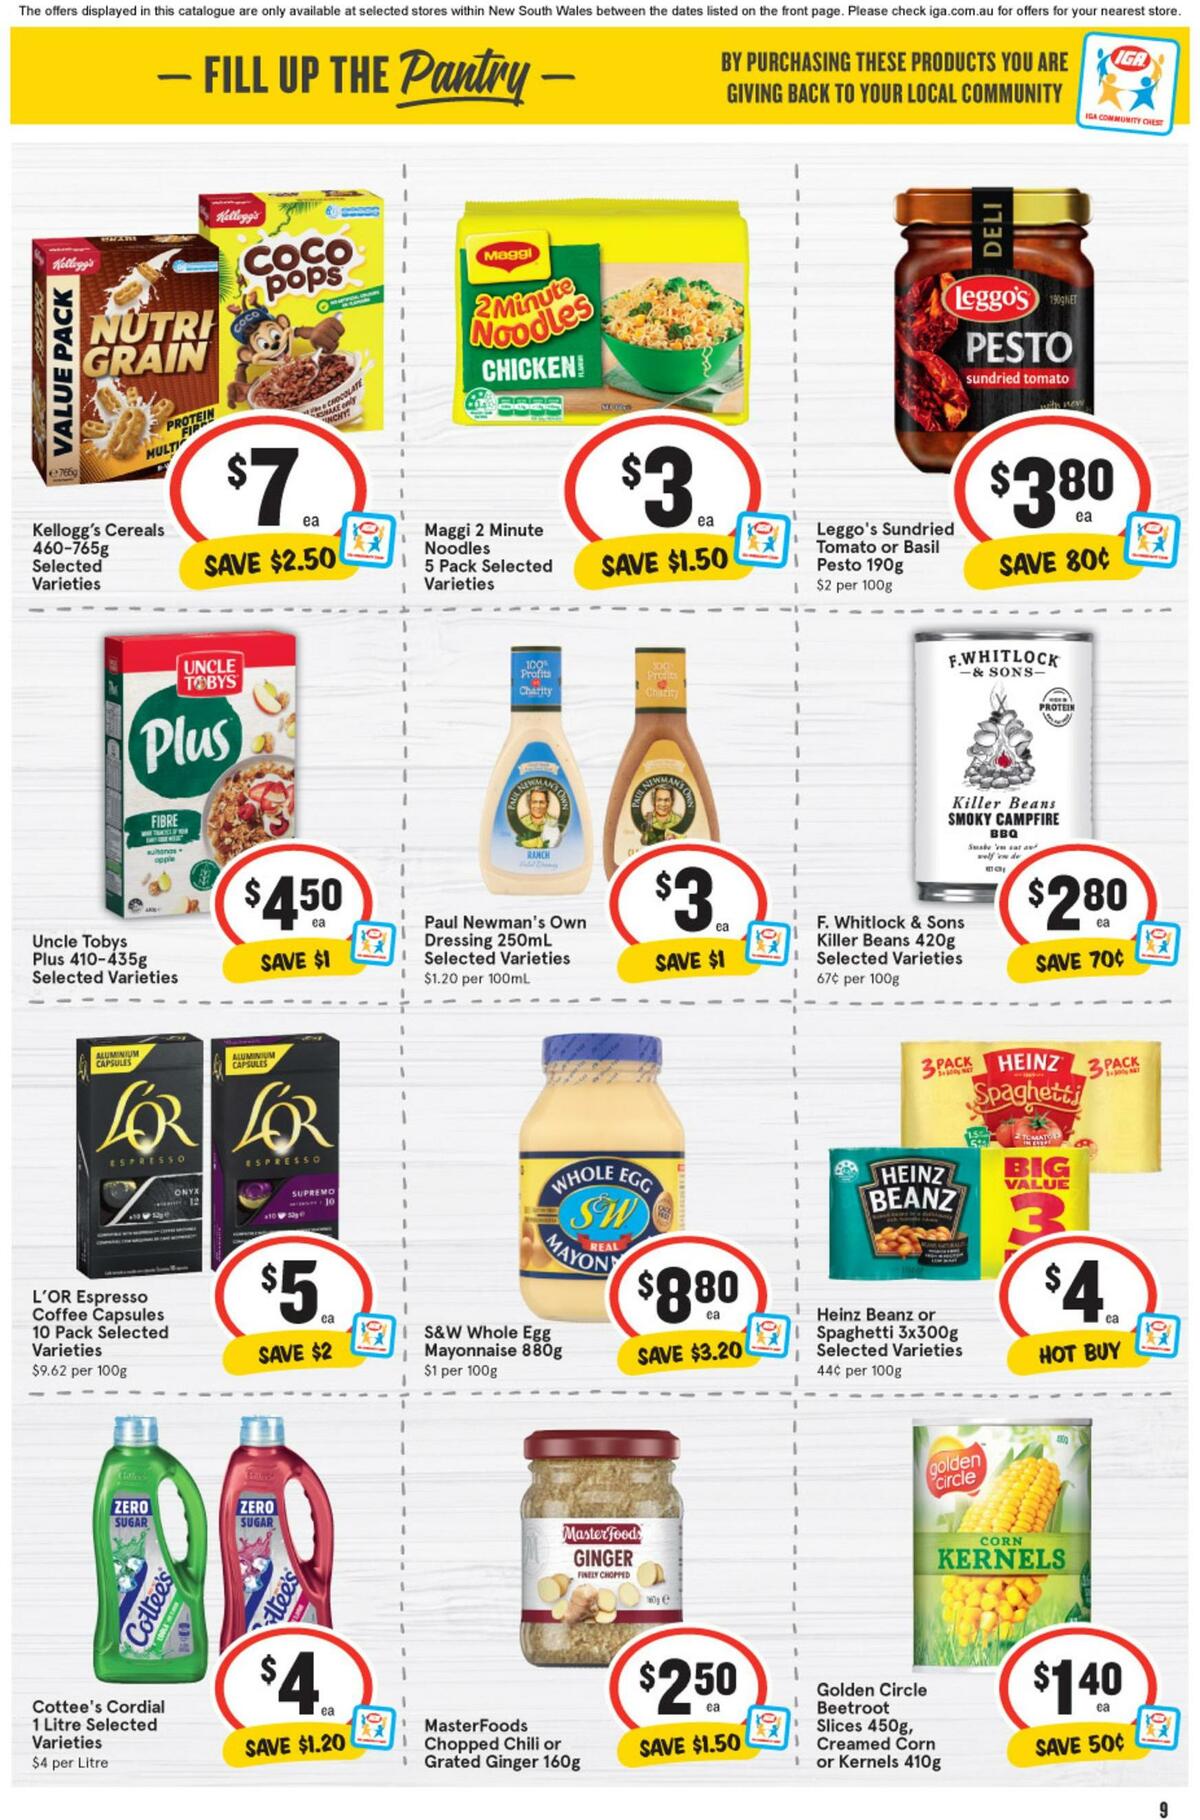 IGA Catalogues from 24 August